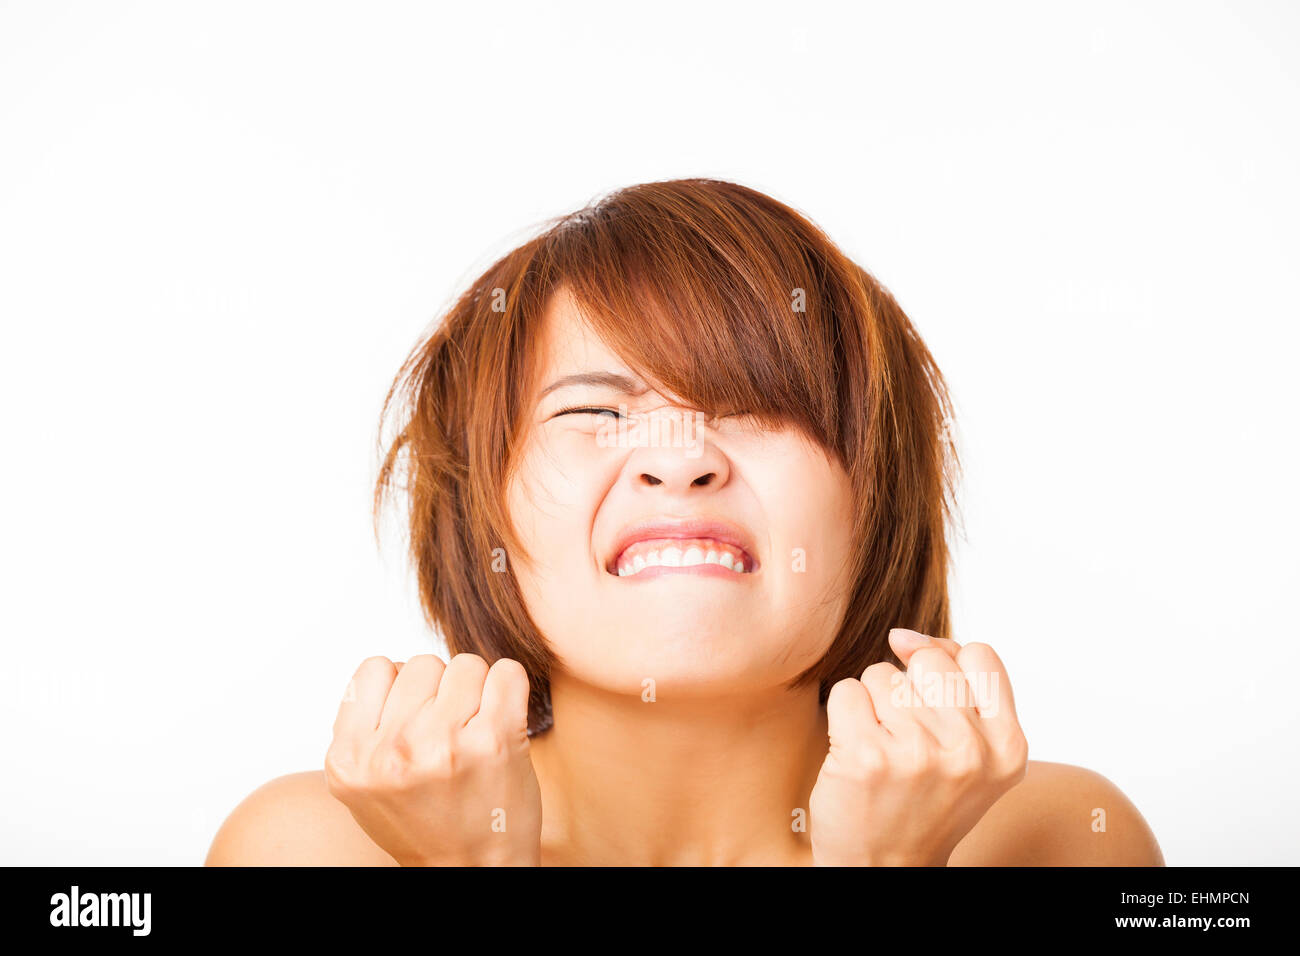 Closeup angry young woman face Stock Photo